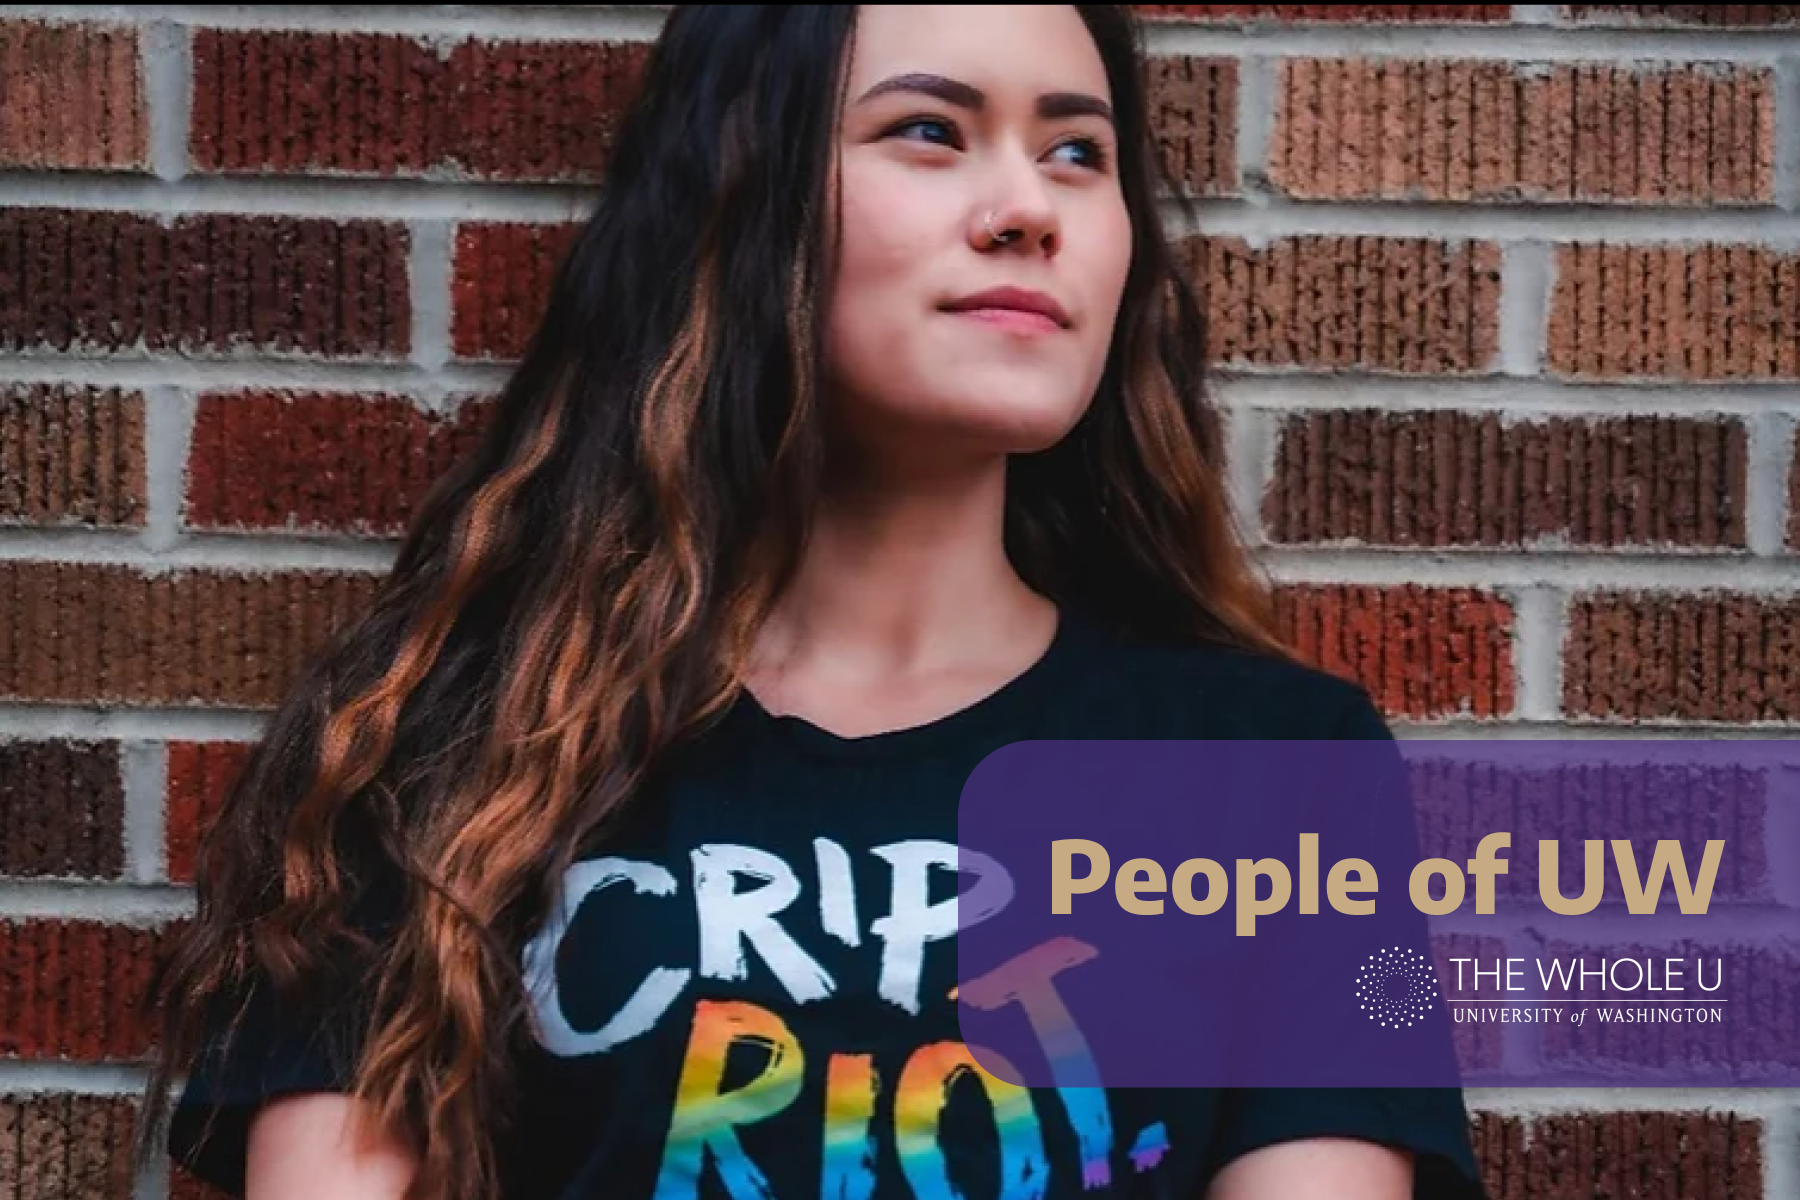 Asian American woman with long wavy brown hair, wearing a black shirt with rainbow text that reads "CRIP RIOT", looks away from the camera, against a brick wall.